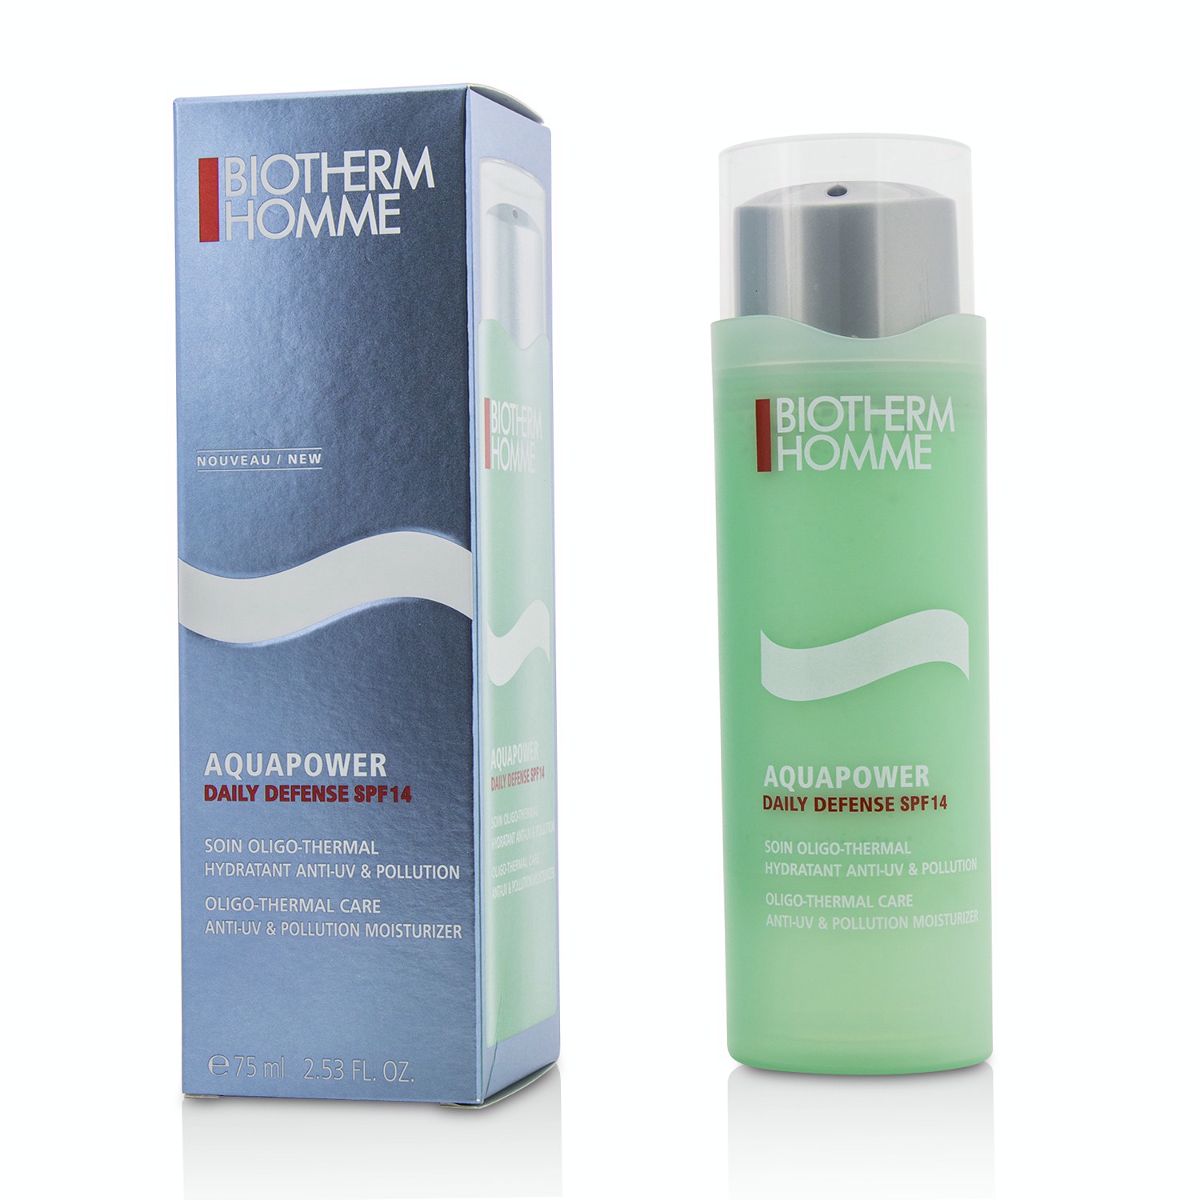 Homme Aquapower Daily Defense SPF 14 Biotherm Image